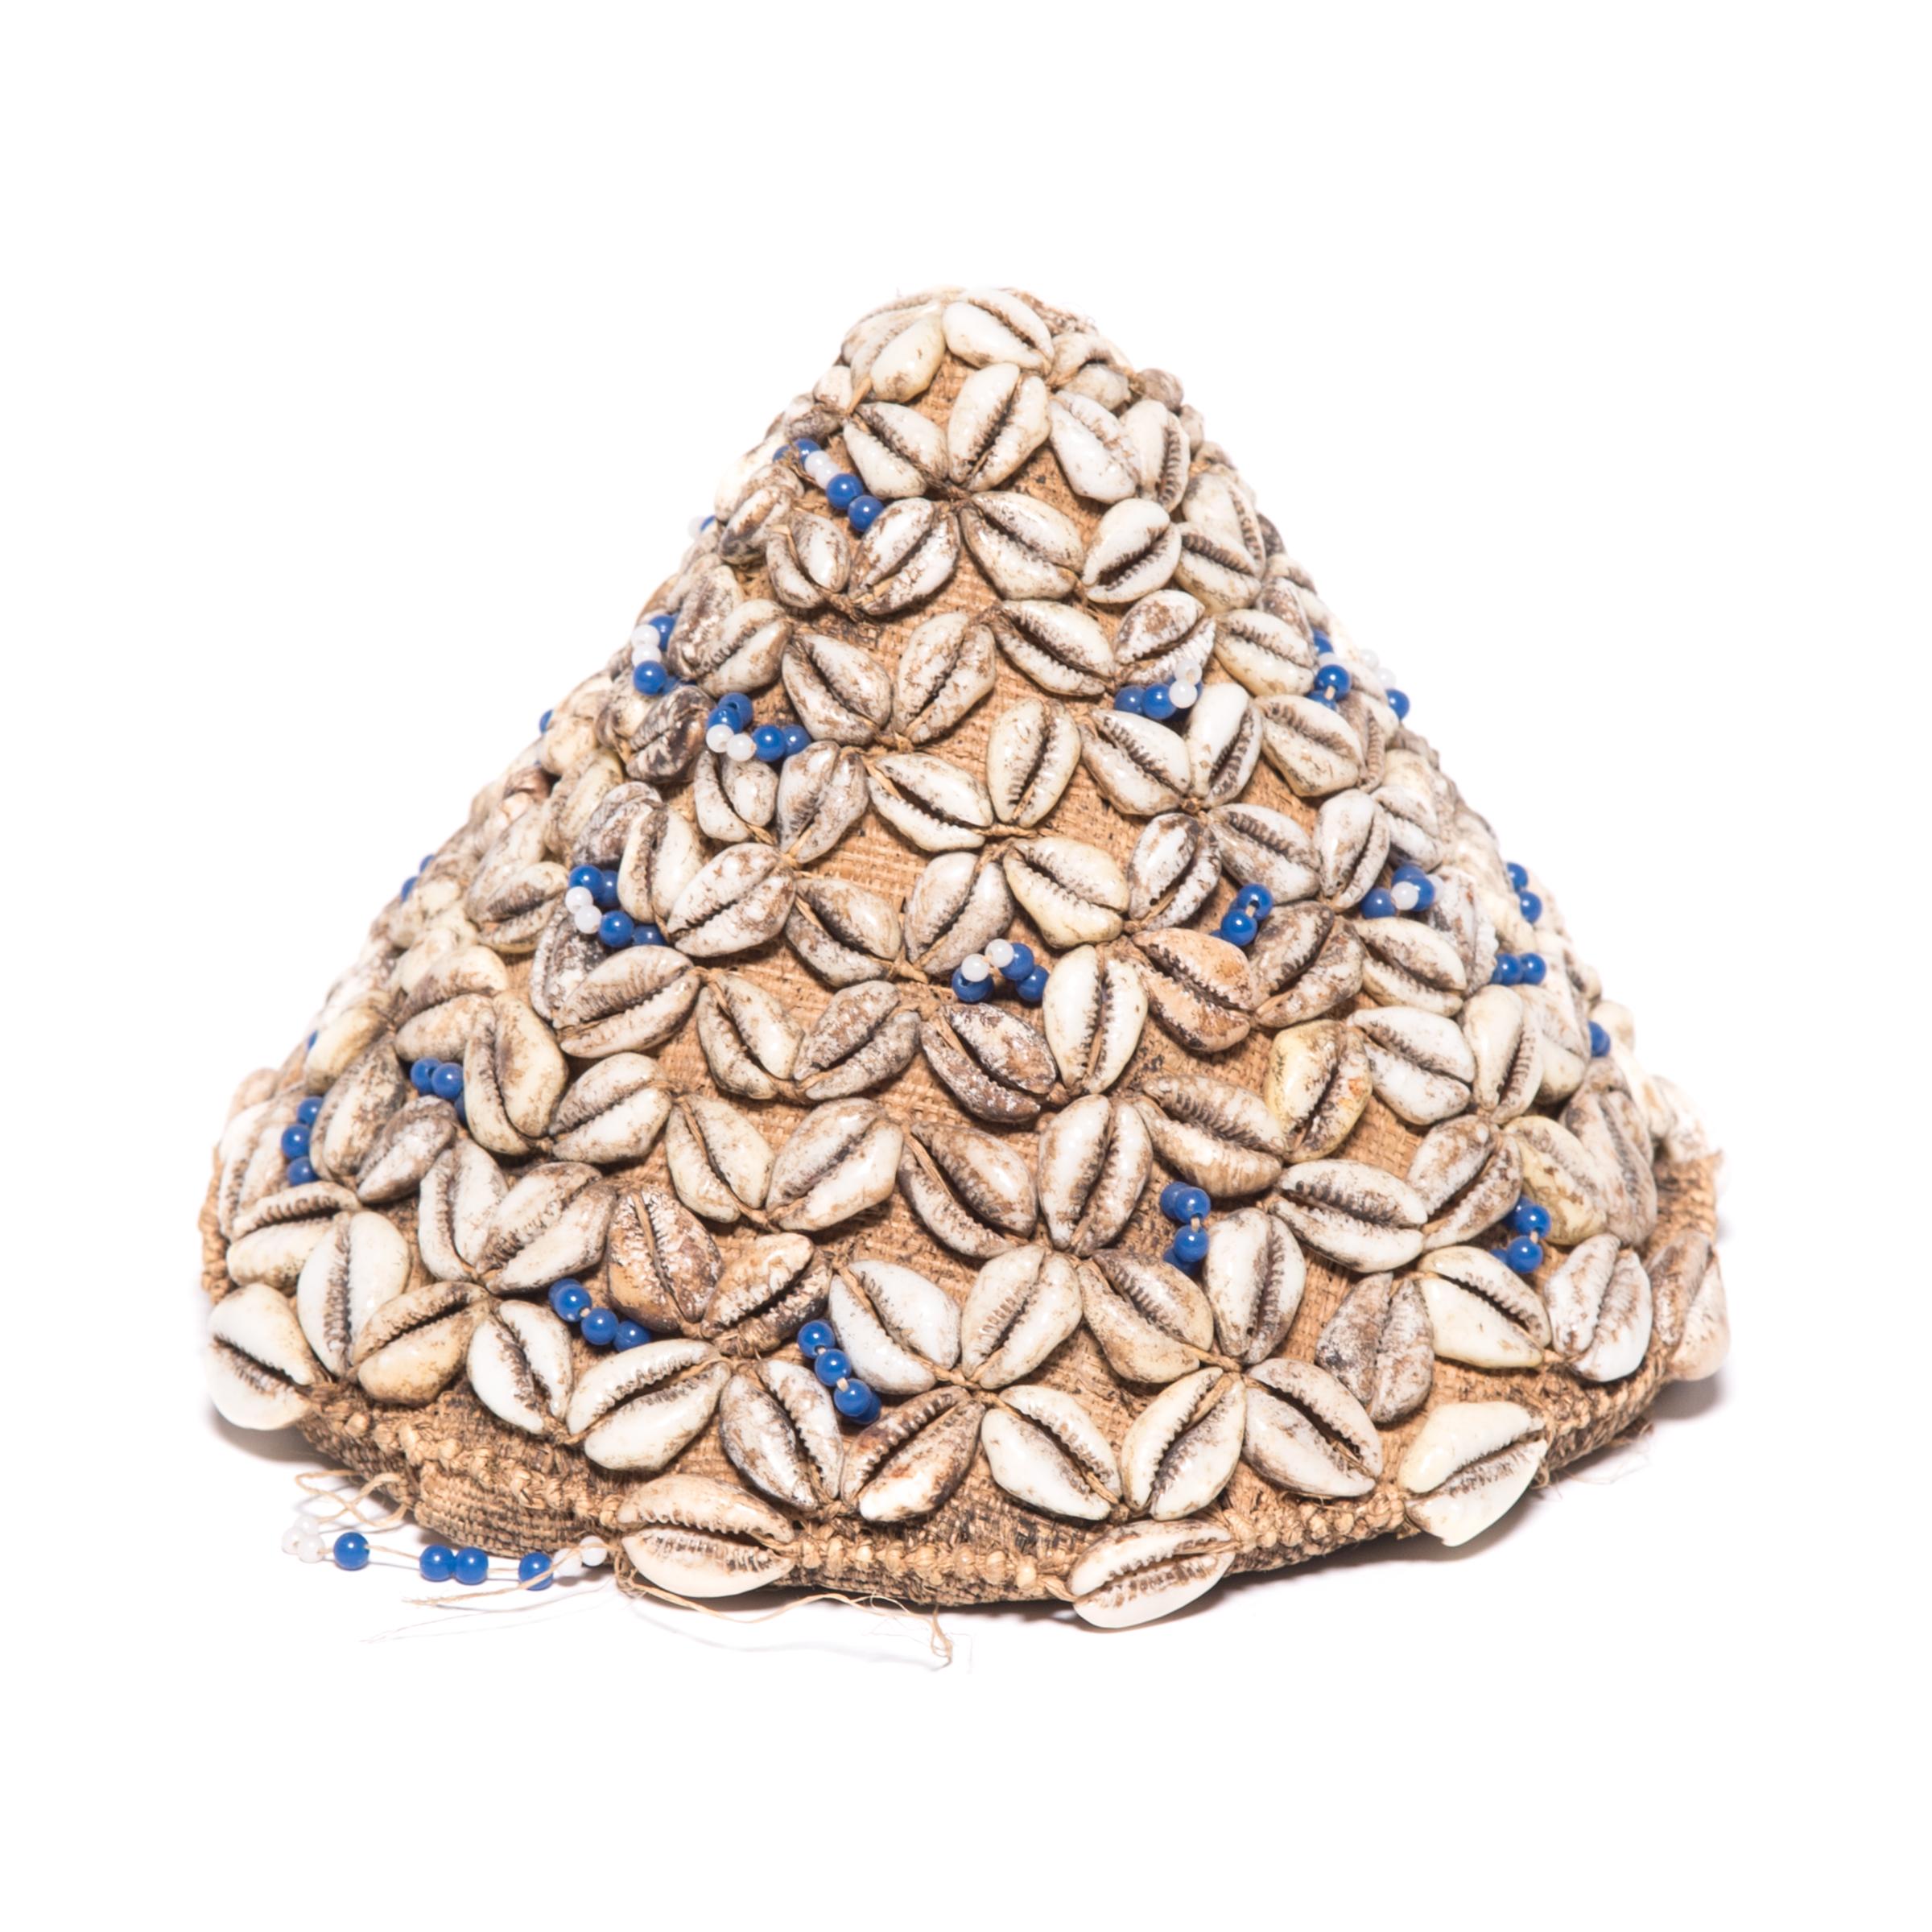 This petite cone-shaped cap, known as laket, was created by an artisan of the Kuba peoples of the Democratic Republic of the Congo. The base is made of a simple woven raffia fabric, which was then patterned with cowrie shells and dotted with blue